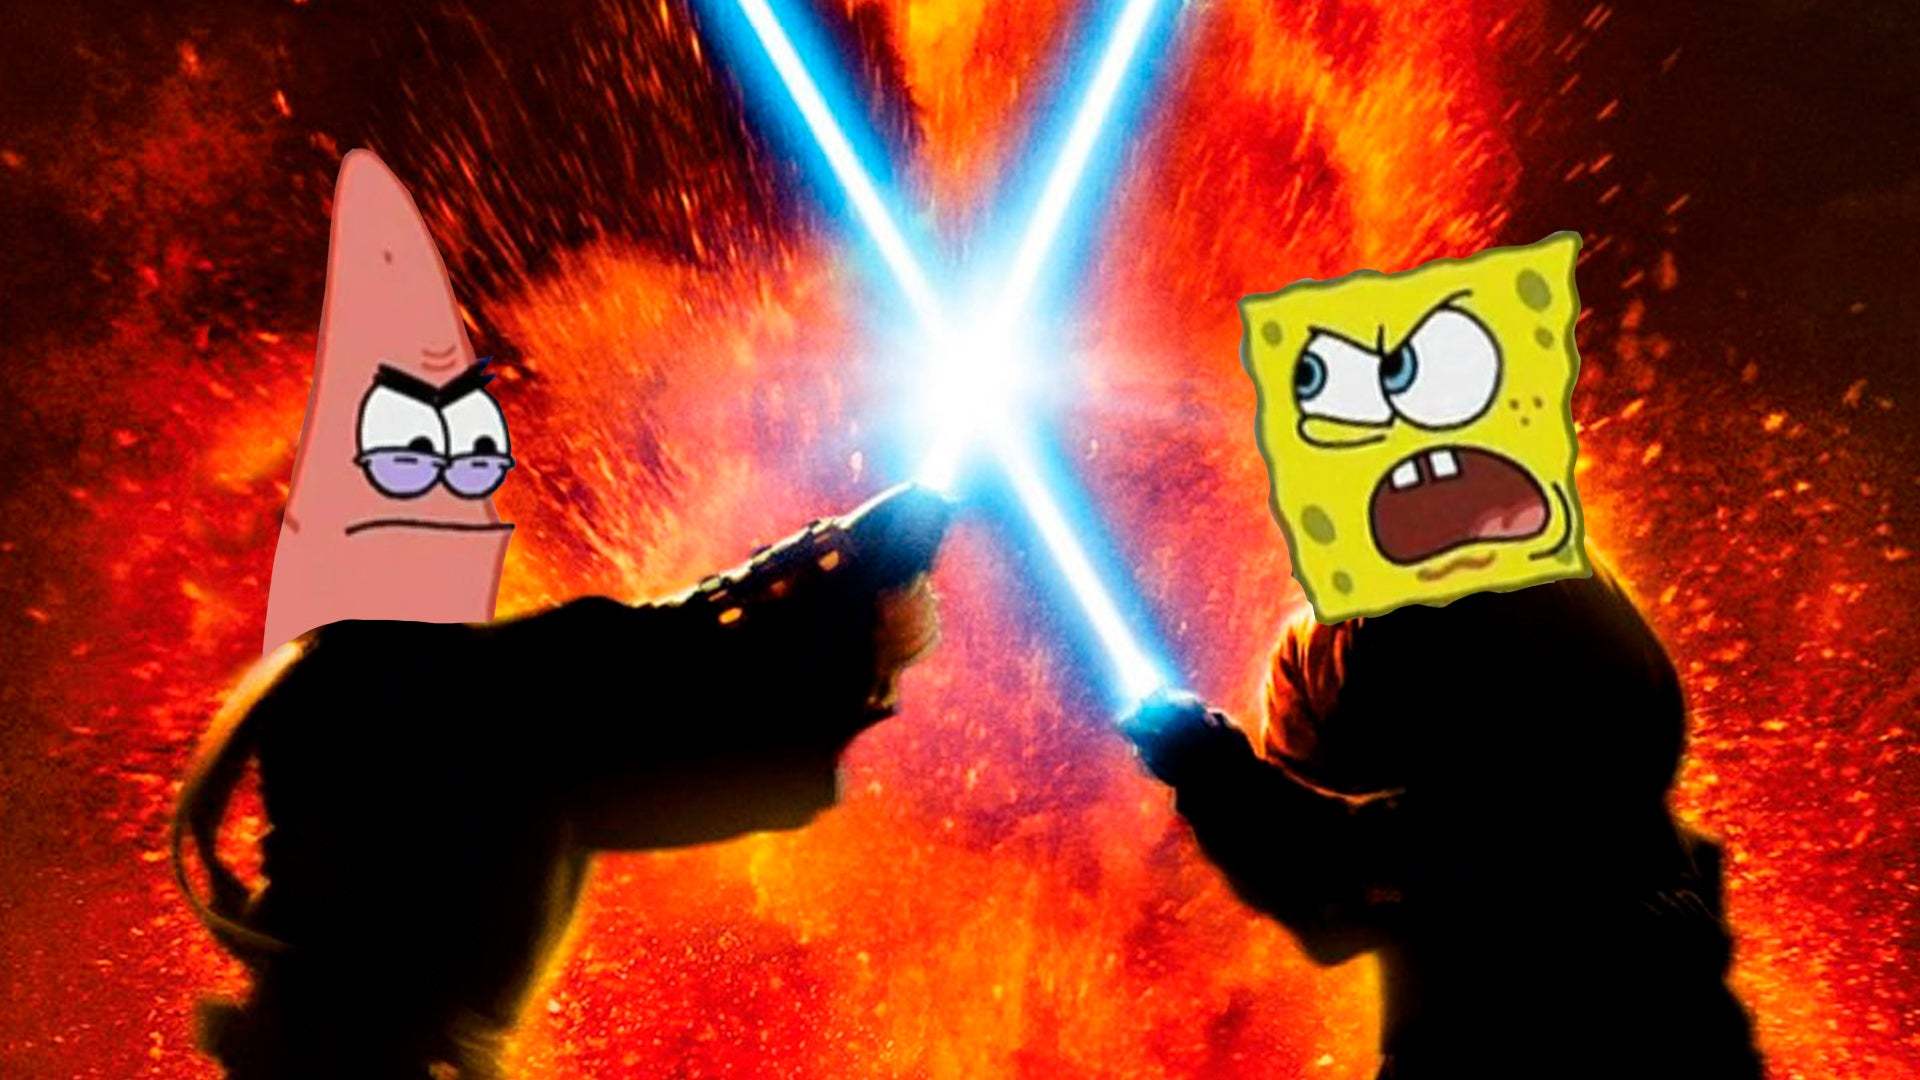 SpongeBob Stars Dub Iconic Movie Scenes From Return of the King to Revenge of the Sith